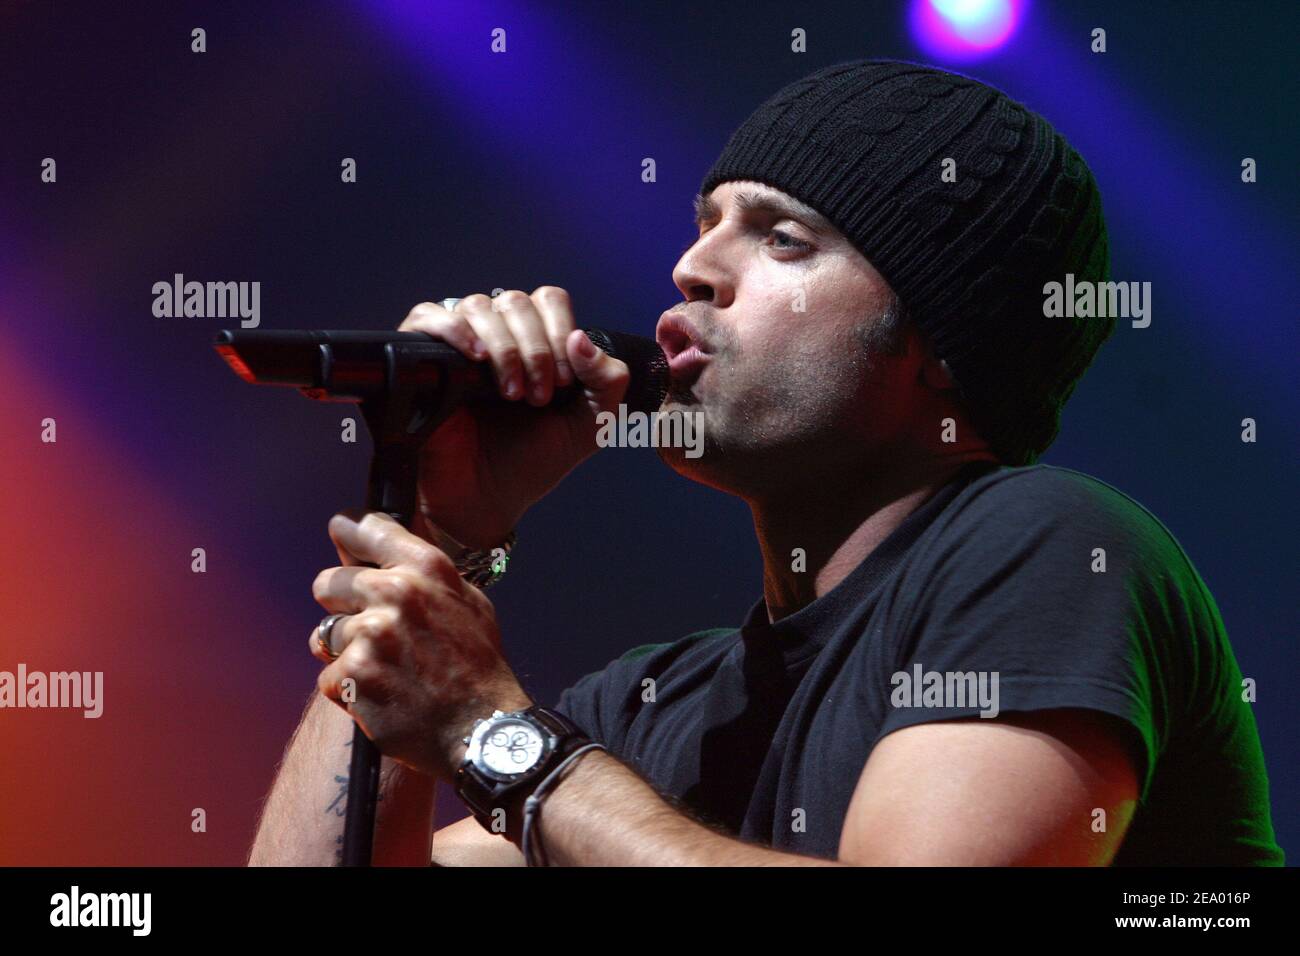 David Charvet performs during the taping of a show for the 50th anniversary of TV channel RTL 9 at the Olympia in Paris, France, on February 7, 2005. The show is to be broadcast on February 9. Photo by Audrey Morant/ABACA Stock Photo